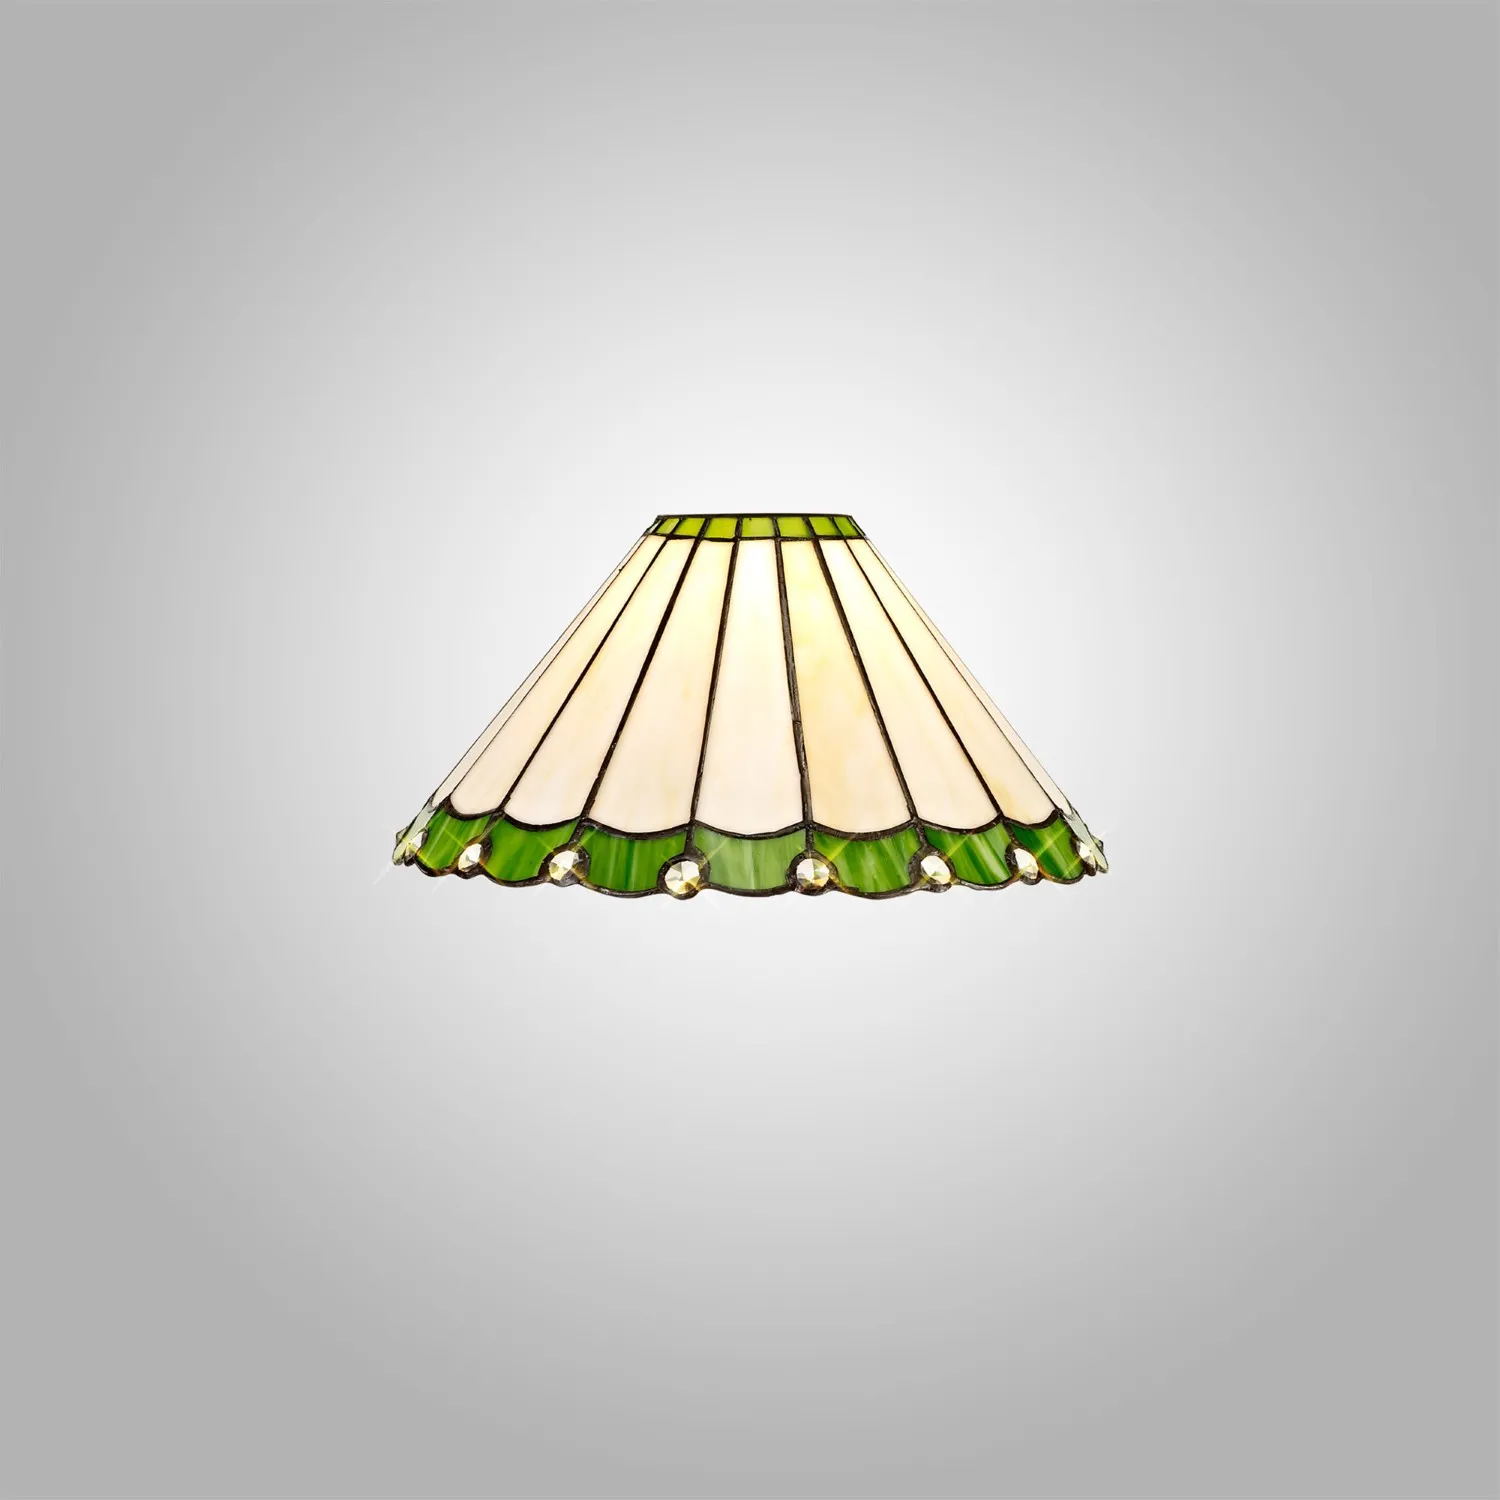 Ware Tiffany 30cm Non Electric Shade, Green Cream Crystal. Suitable For E27 or B22 Pendants